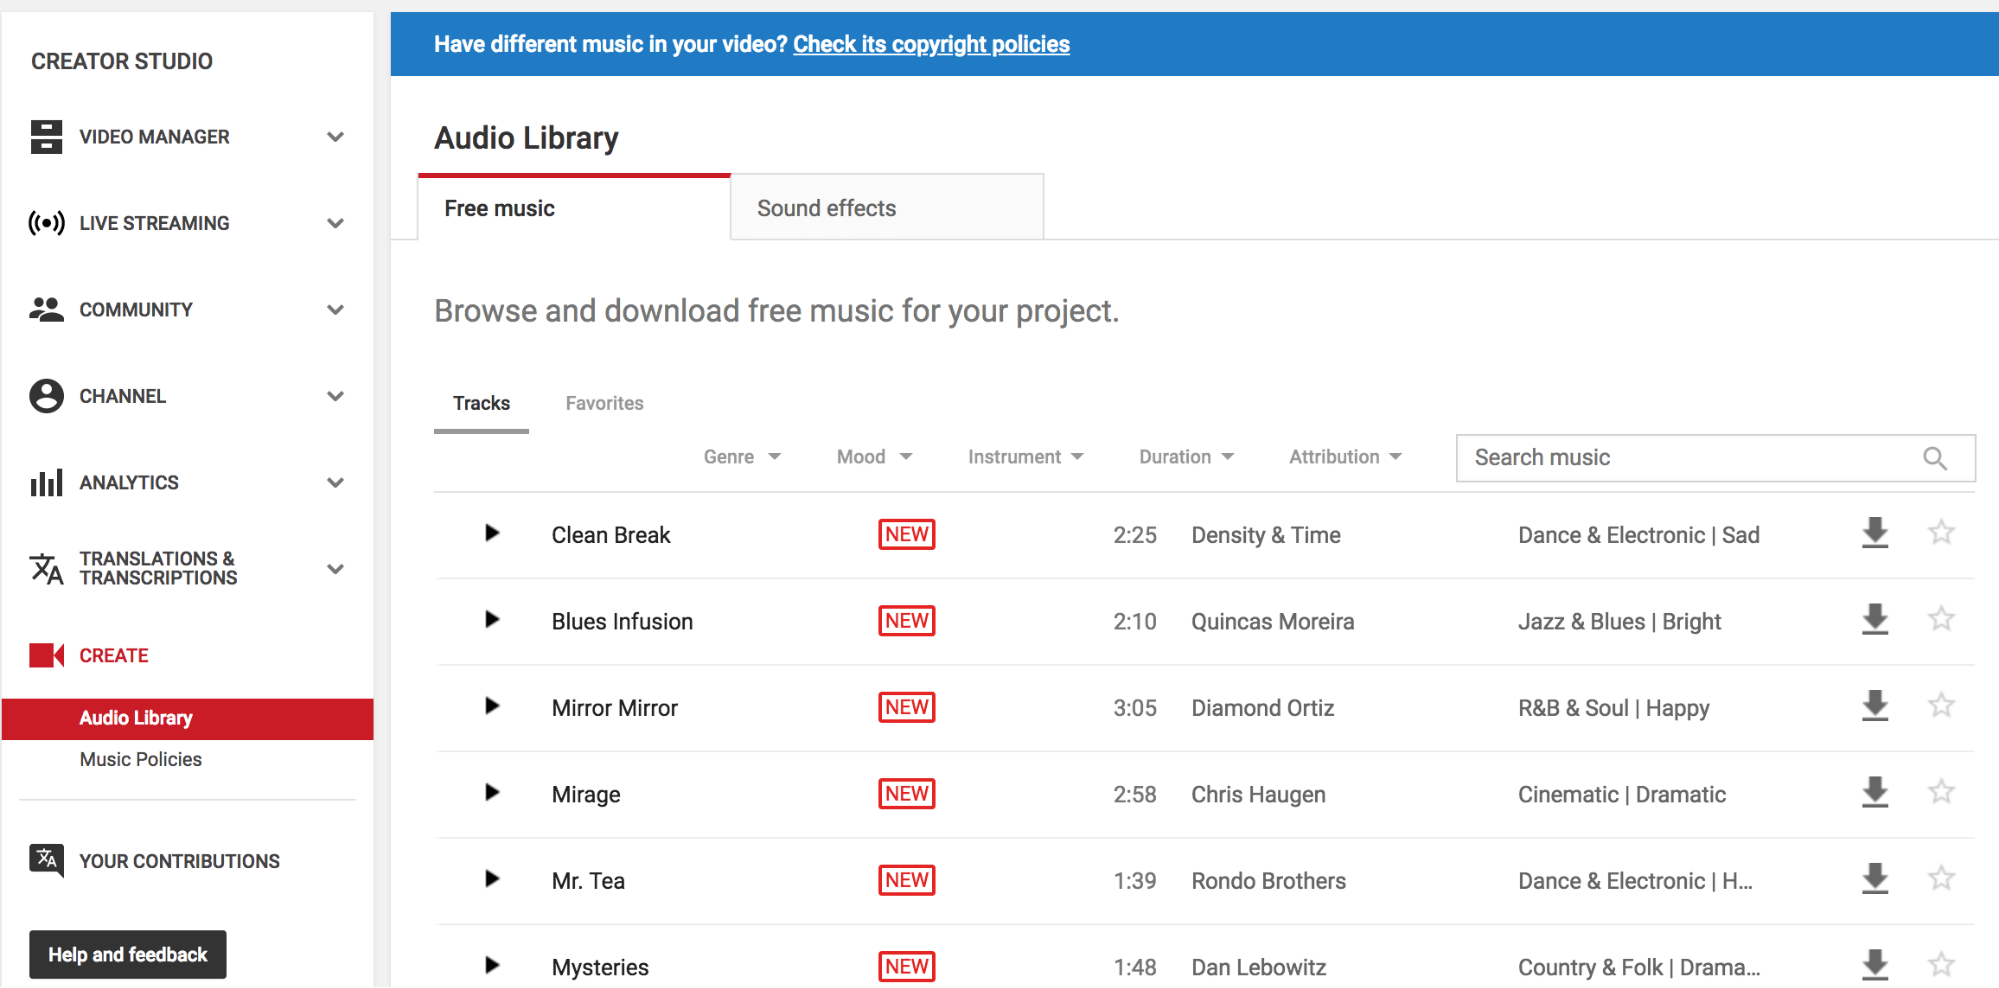 Guide To The Youtube Audio Library & Royalty Free Music For Videos